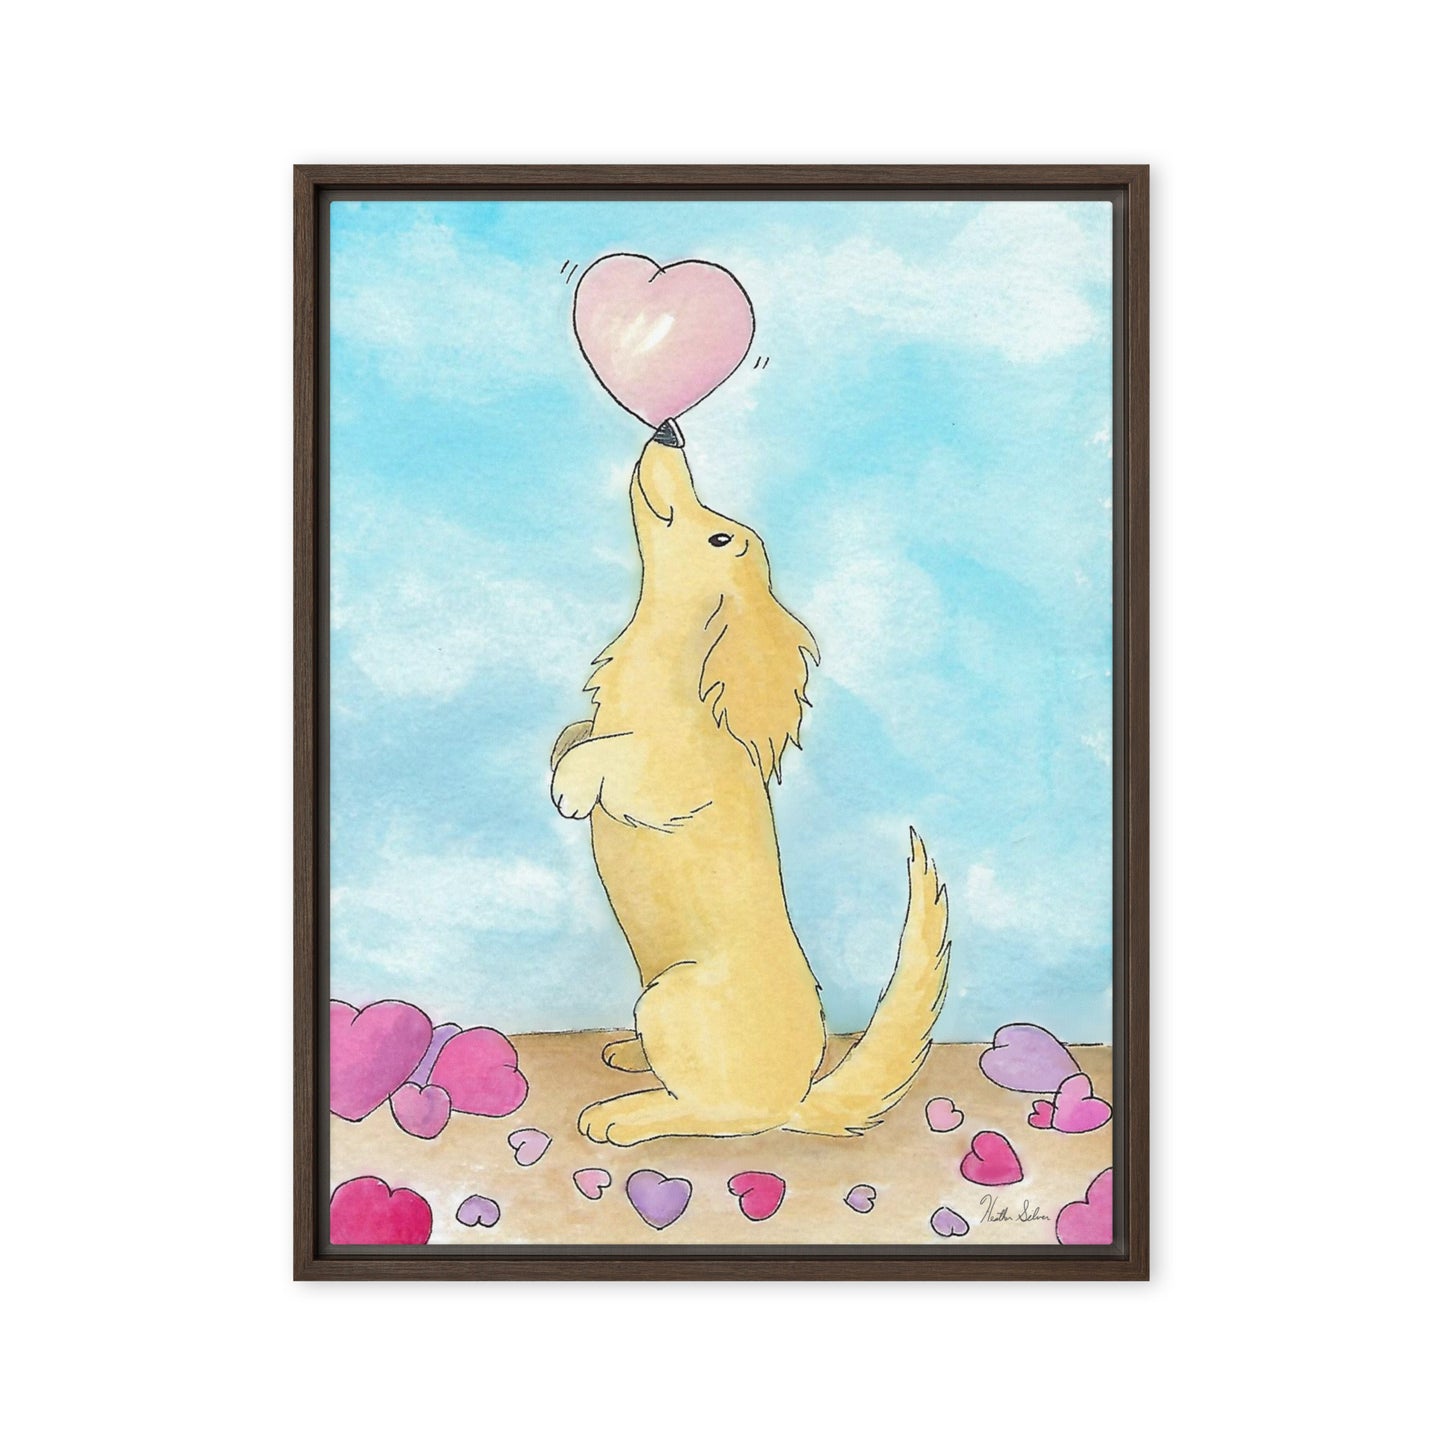 18 by 24 inch framed canvas Puppy Love print. The canvas is in a brown pine wood frame.